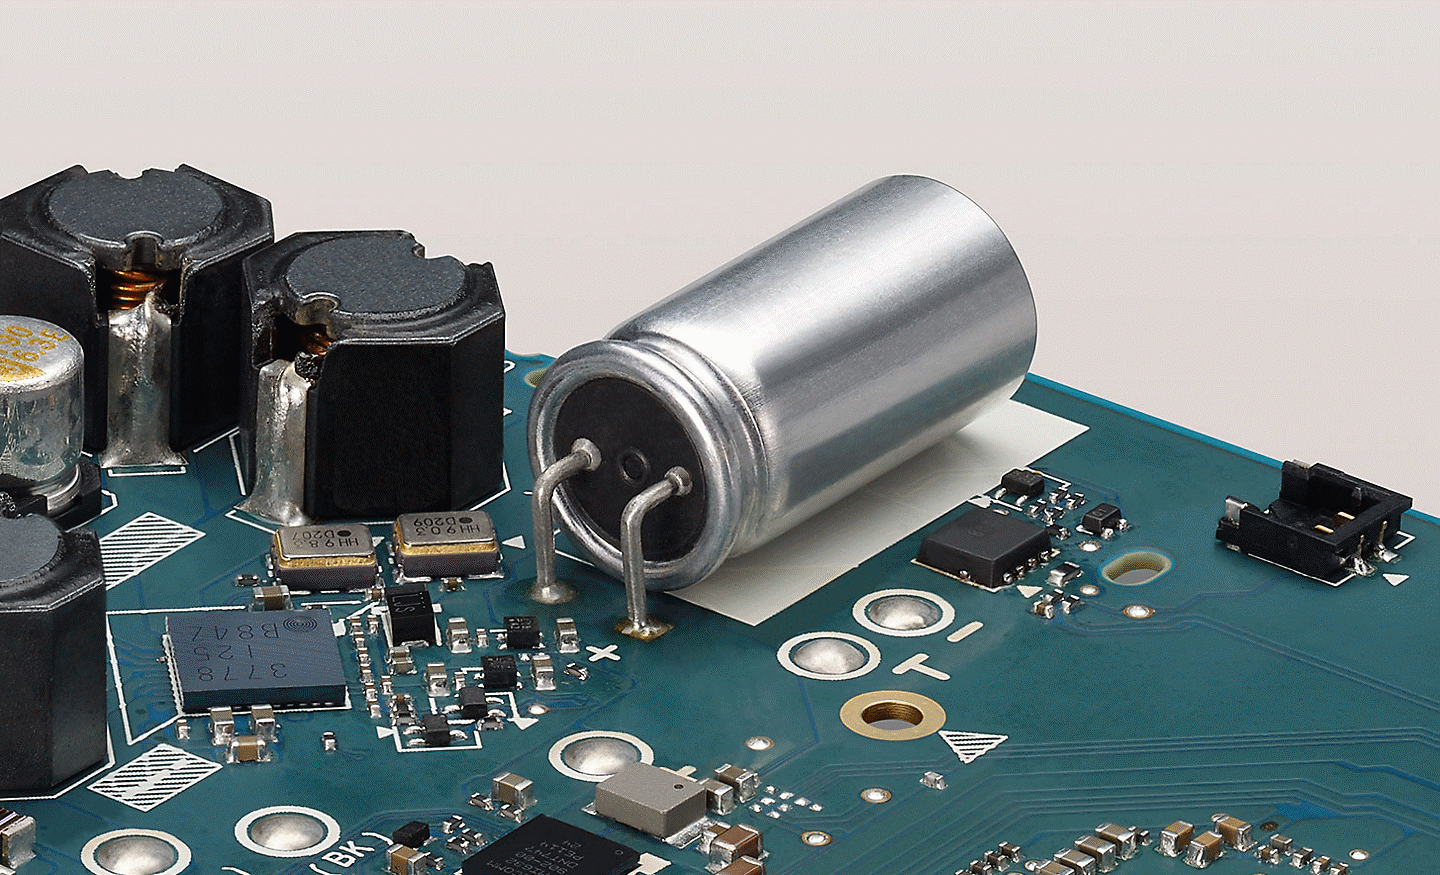 A close up image of the NW-ZX707 large solid high polymer capacitor.